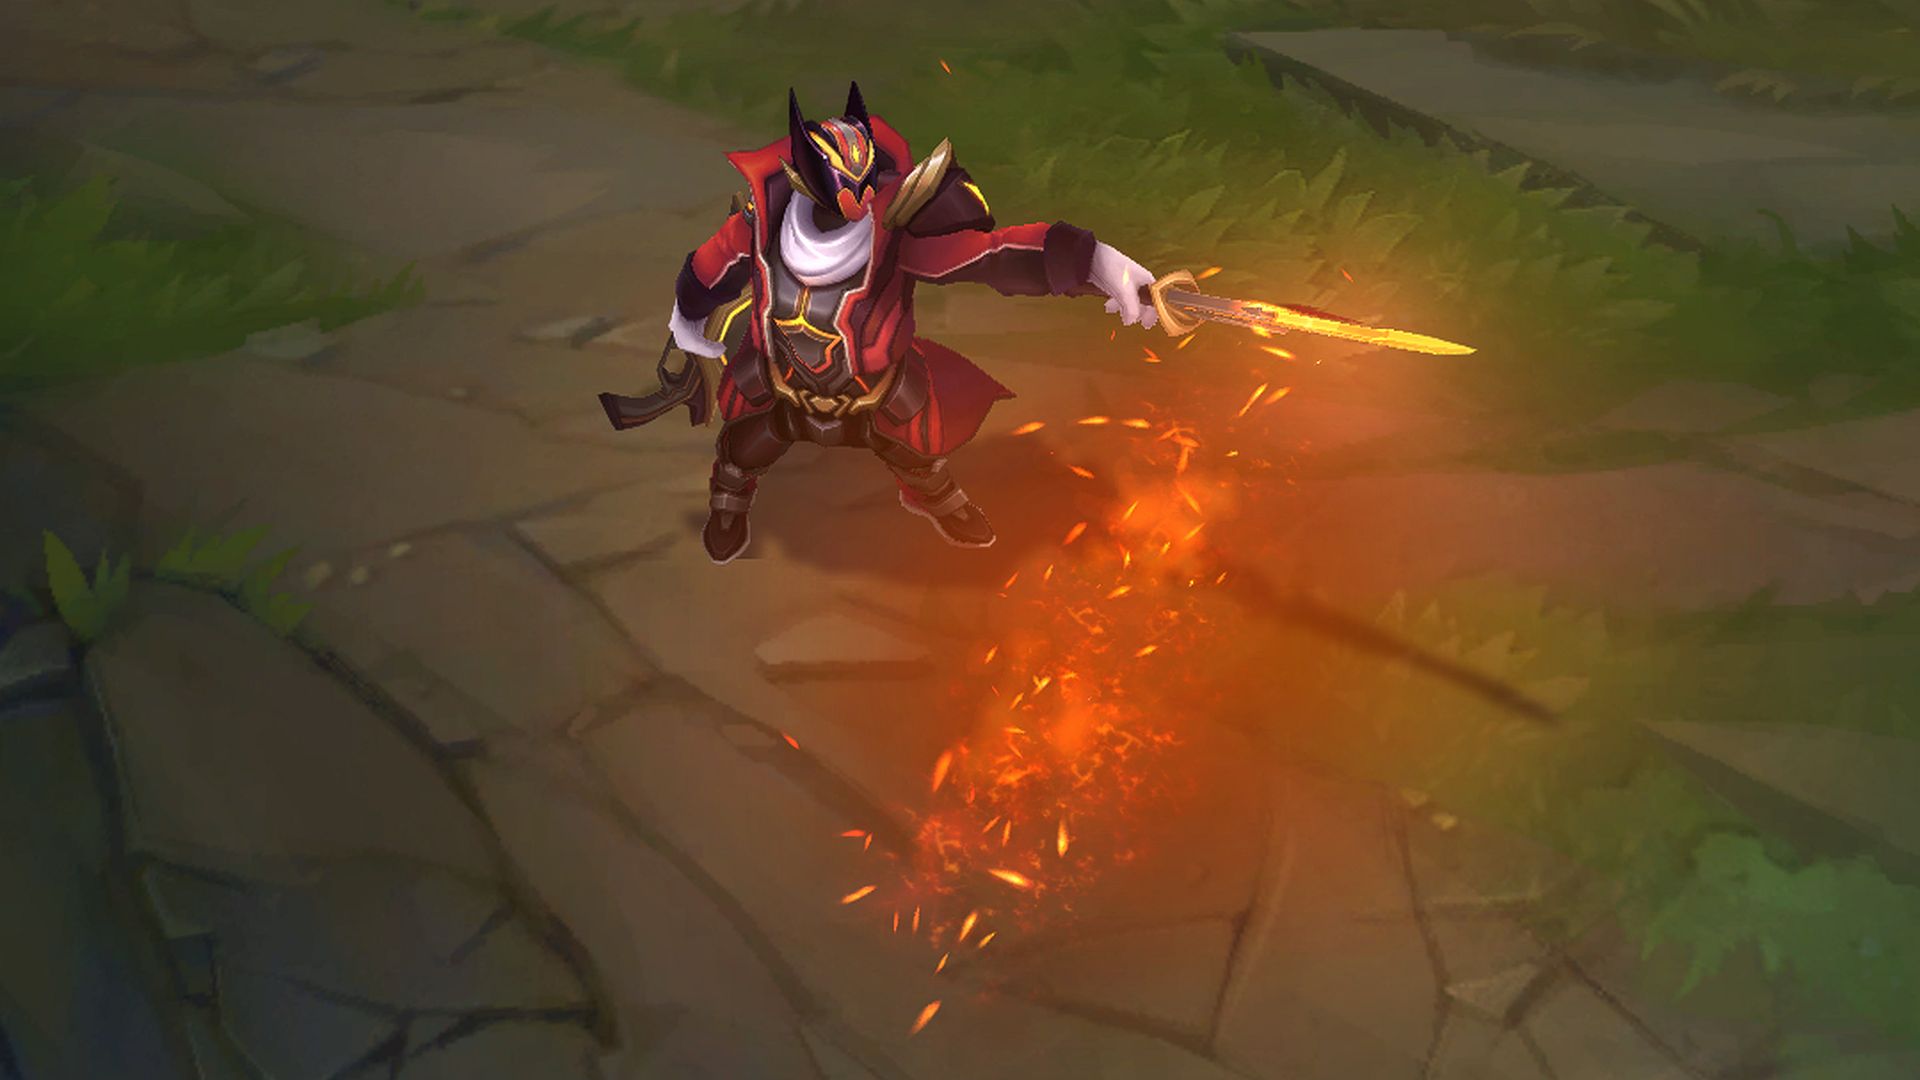 FPX Thresh Skin Preview - League of Legends 